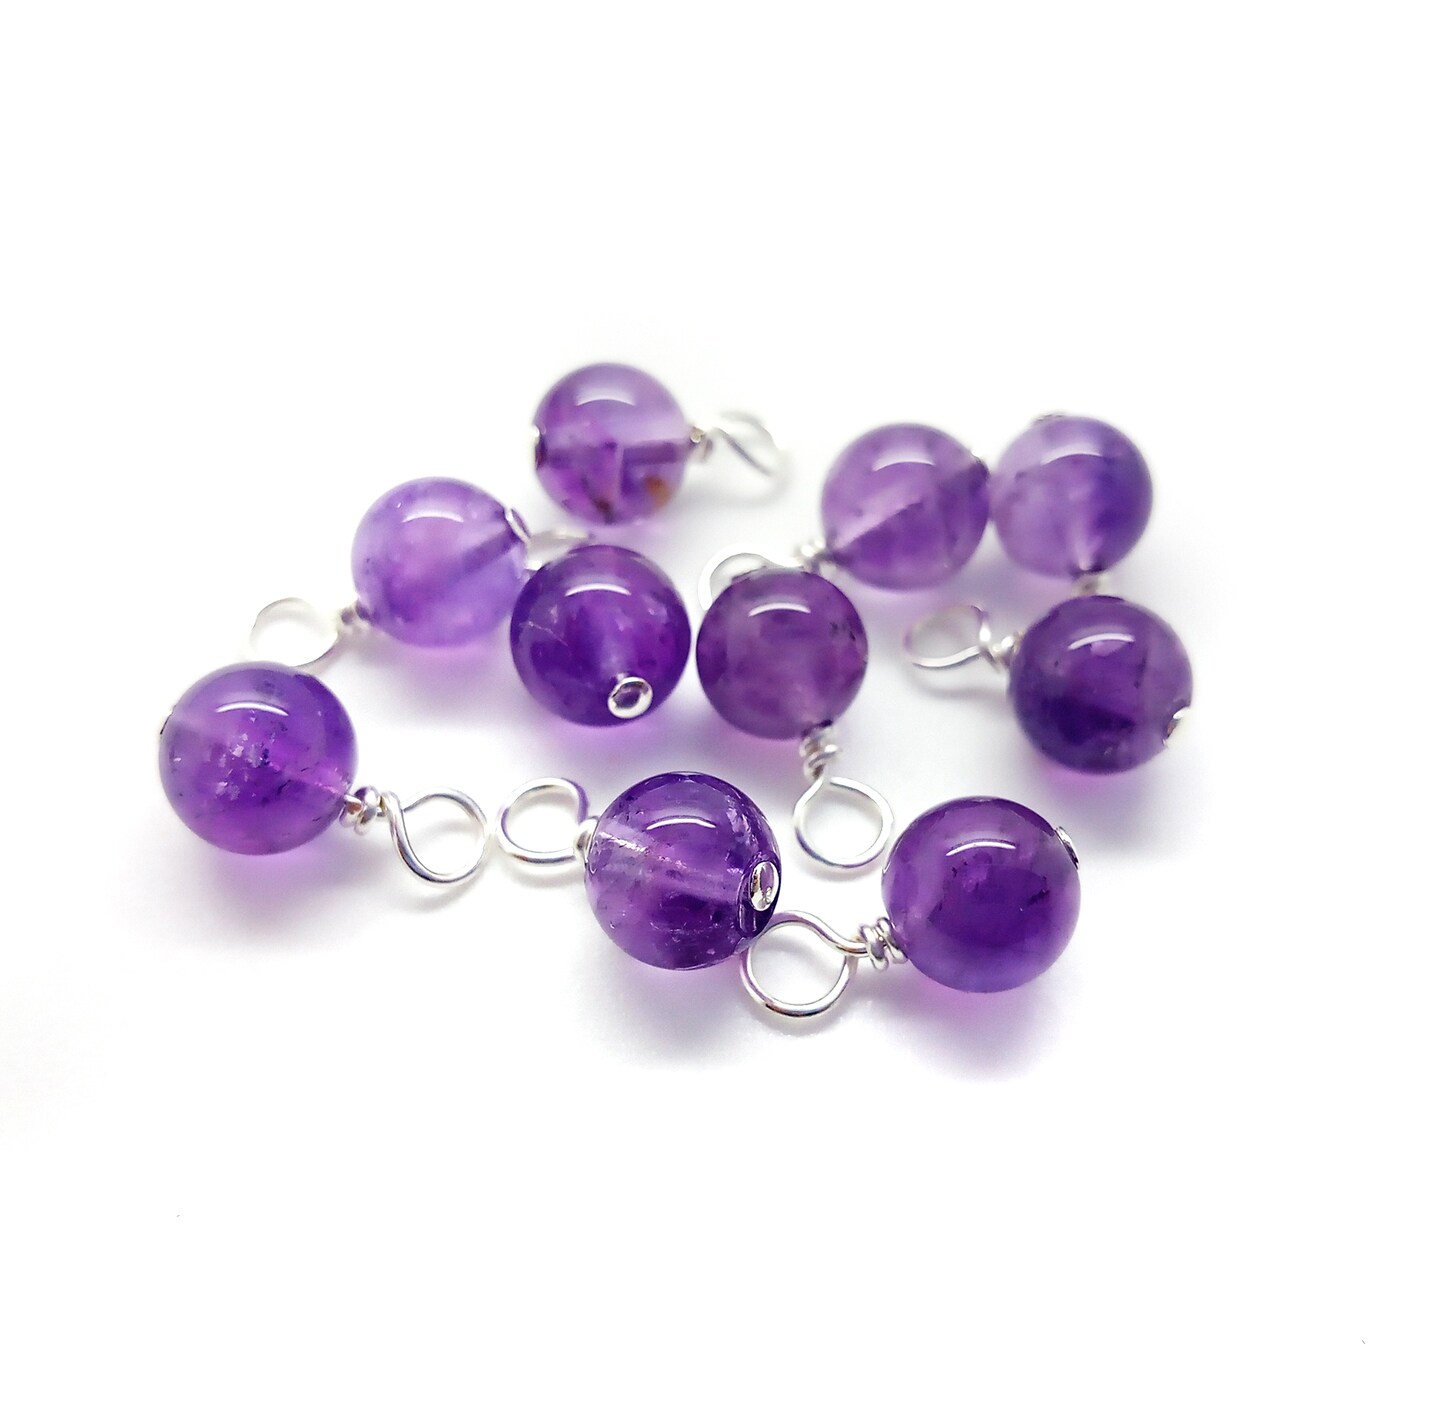 Amethyst 6mm Bead Dangles, Small Gemstone Charms, 10 pieces, Adorabilities